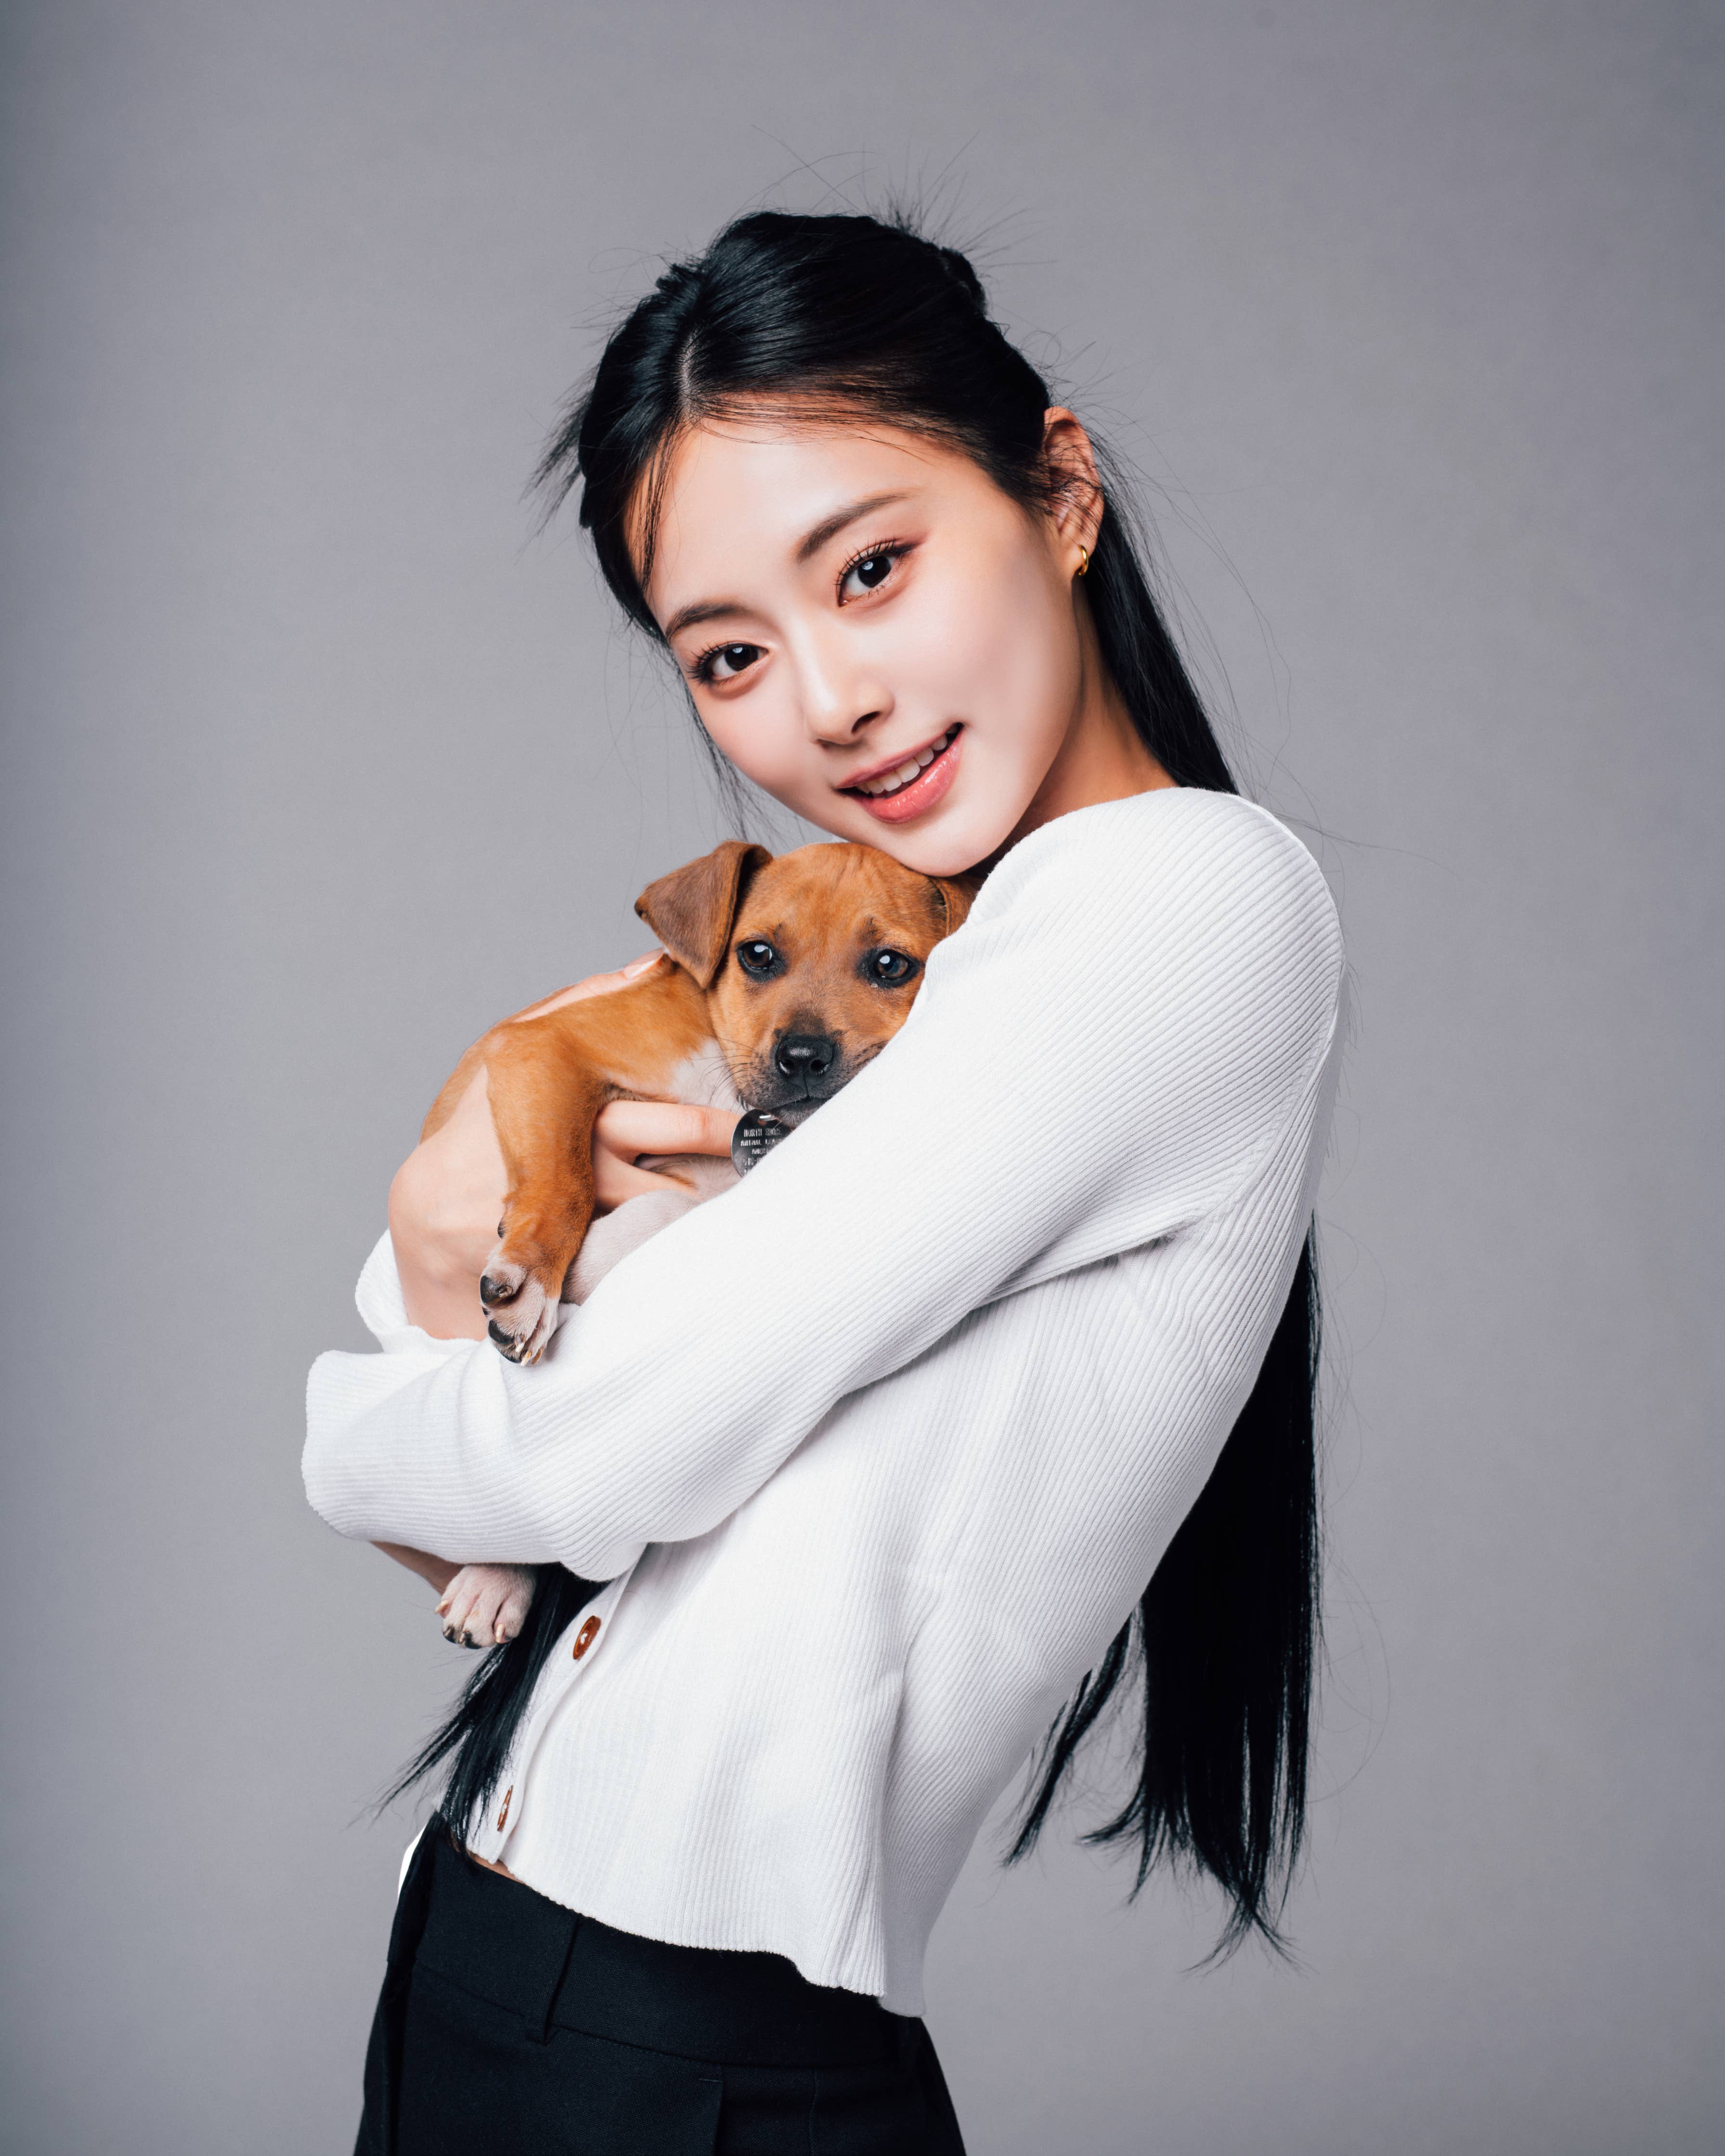 Woman in a white top holds a small puppy, both looking at the camera